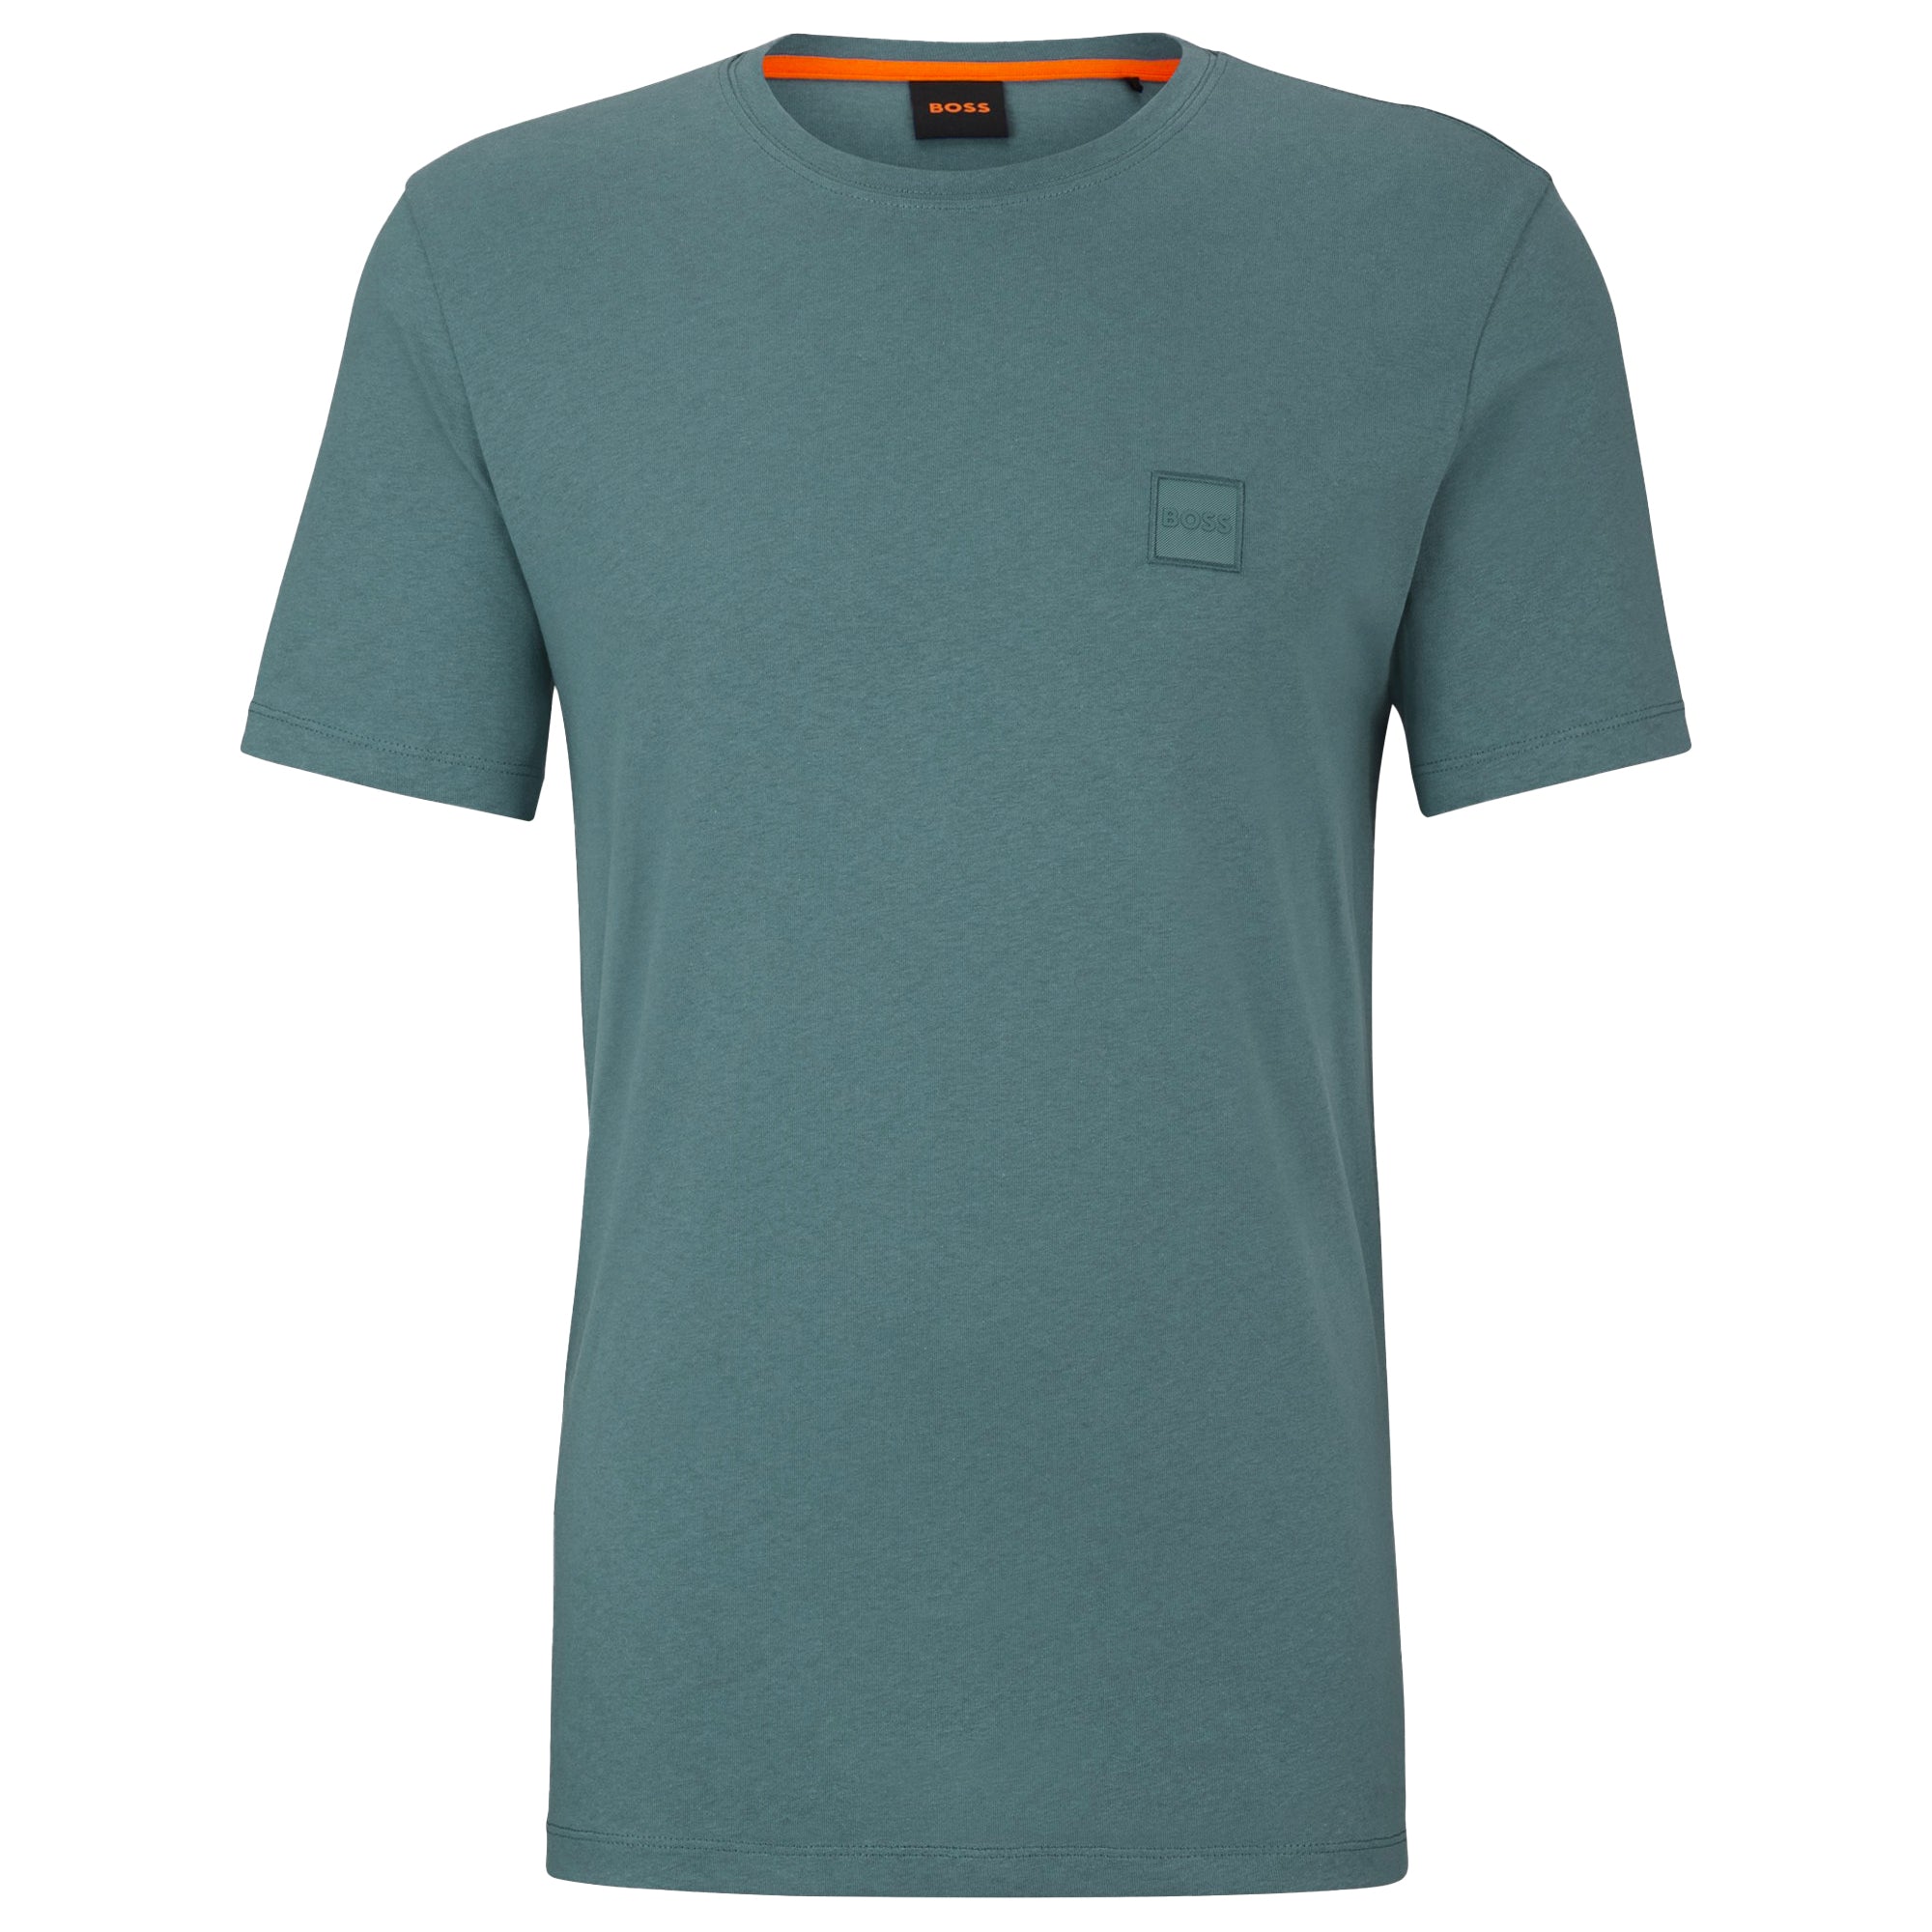 Boss Tales T-Shirt - Washed Teal